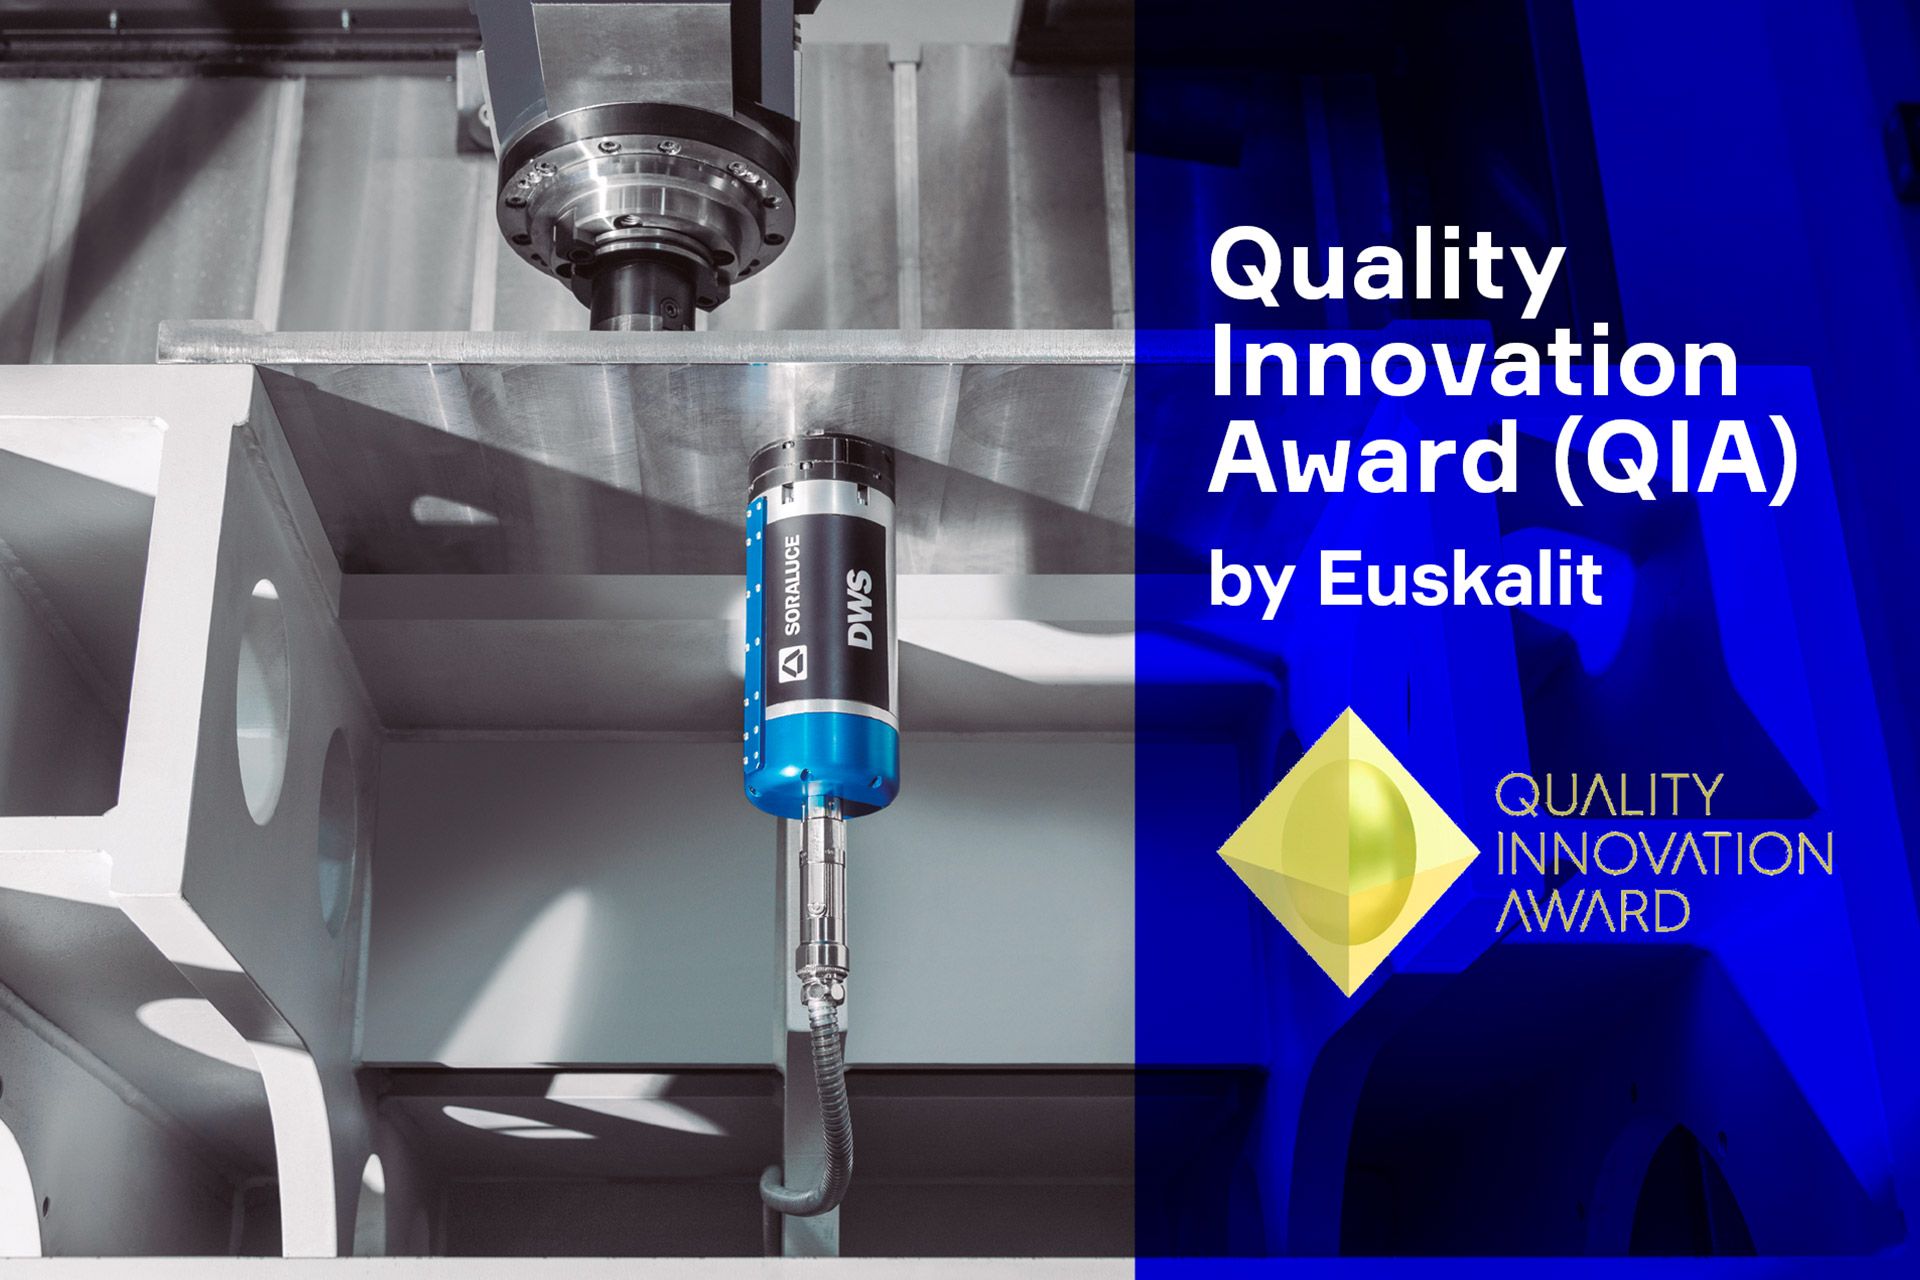 "European quality innovation of the year" award